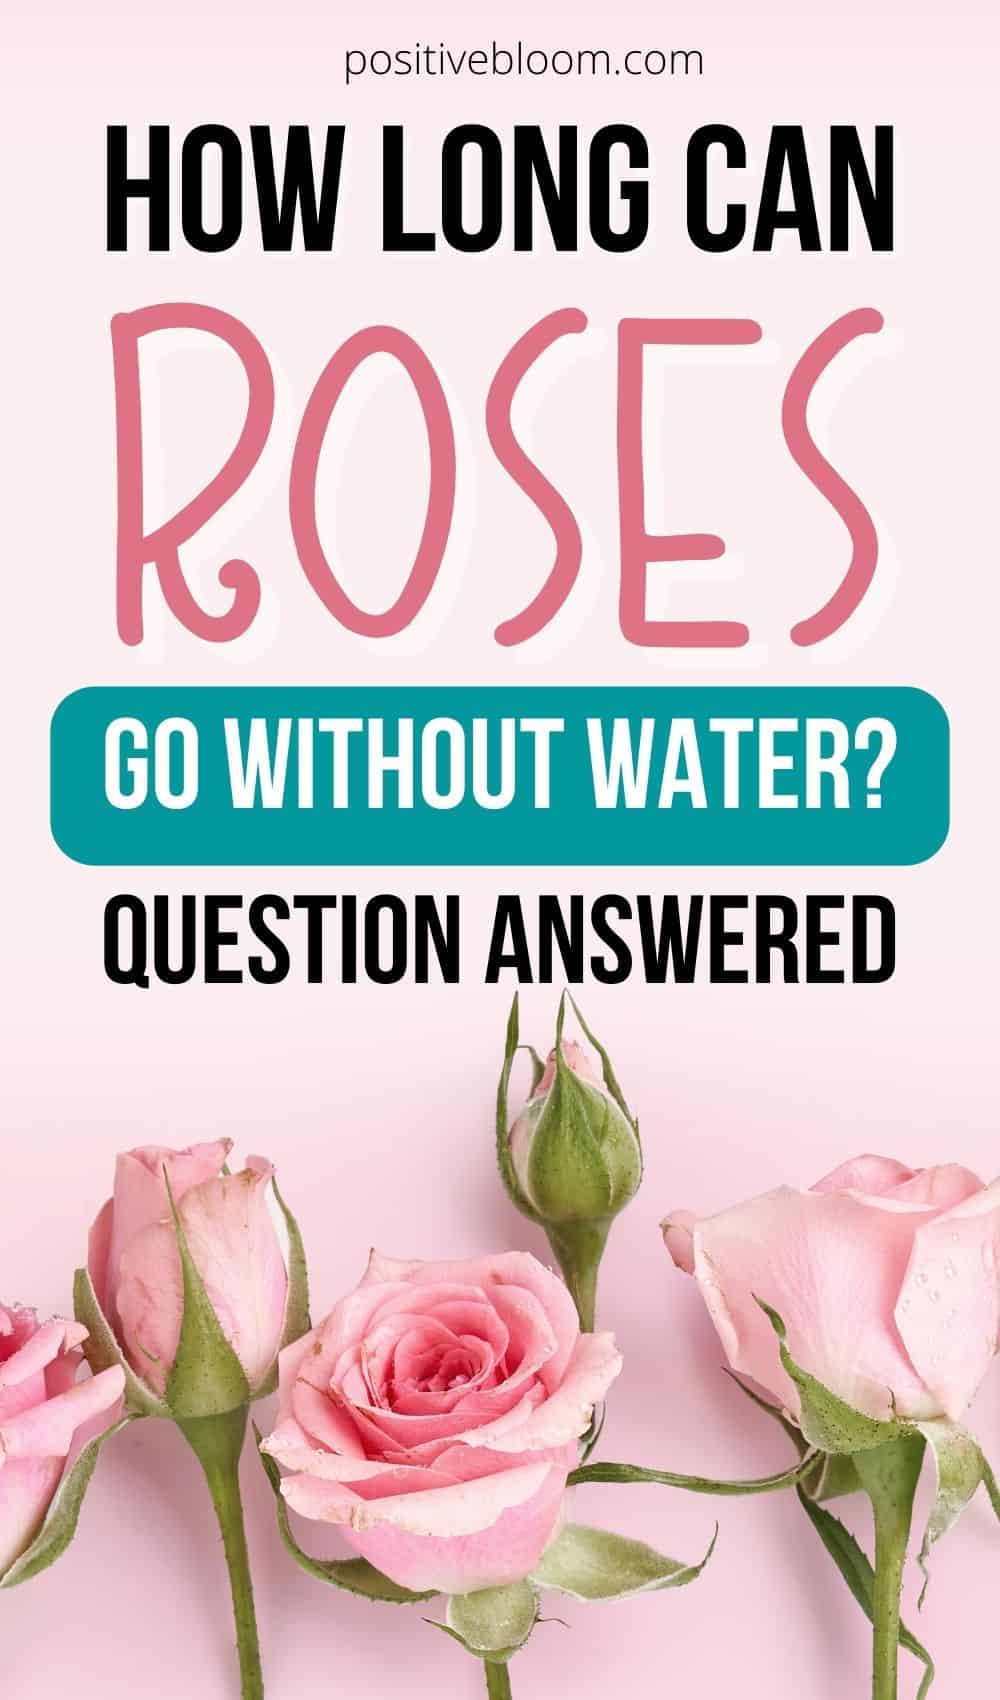 How Long Can Roses Go Without Water Question Answered (1)